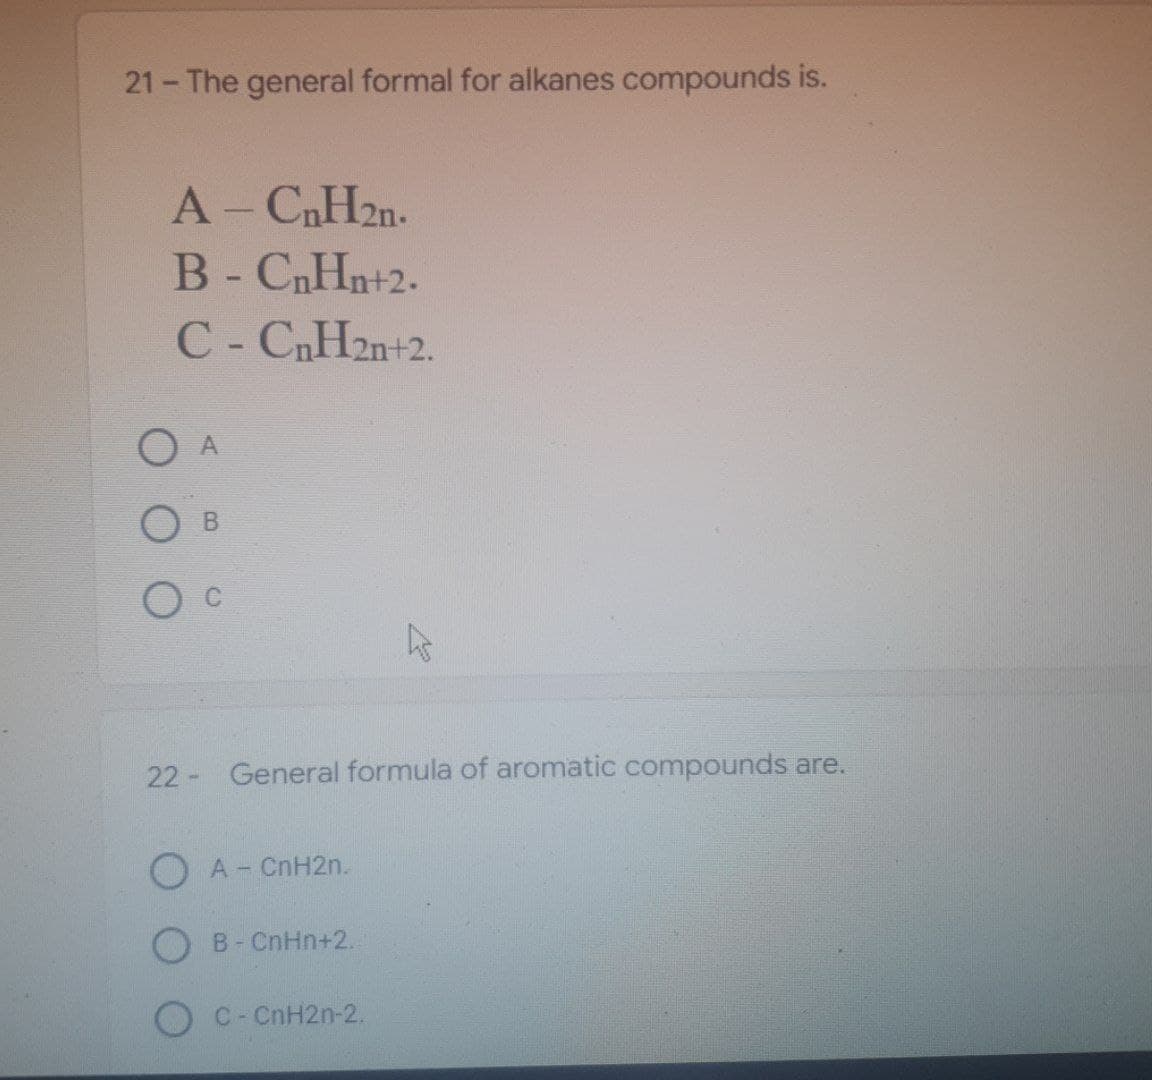 21- The general formal for alkanes compounds is.
A - CnH2n.
B - CnHn+2.
C - CnH2n+2.
O A
B
General formula of aromatic compounds are.
22-
OA - CnH2n.
B - CnHn+2.
OC - CnH2n-2.